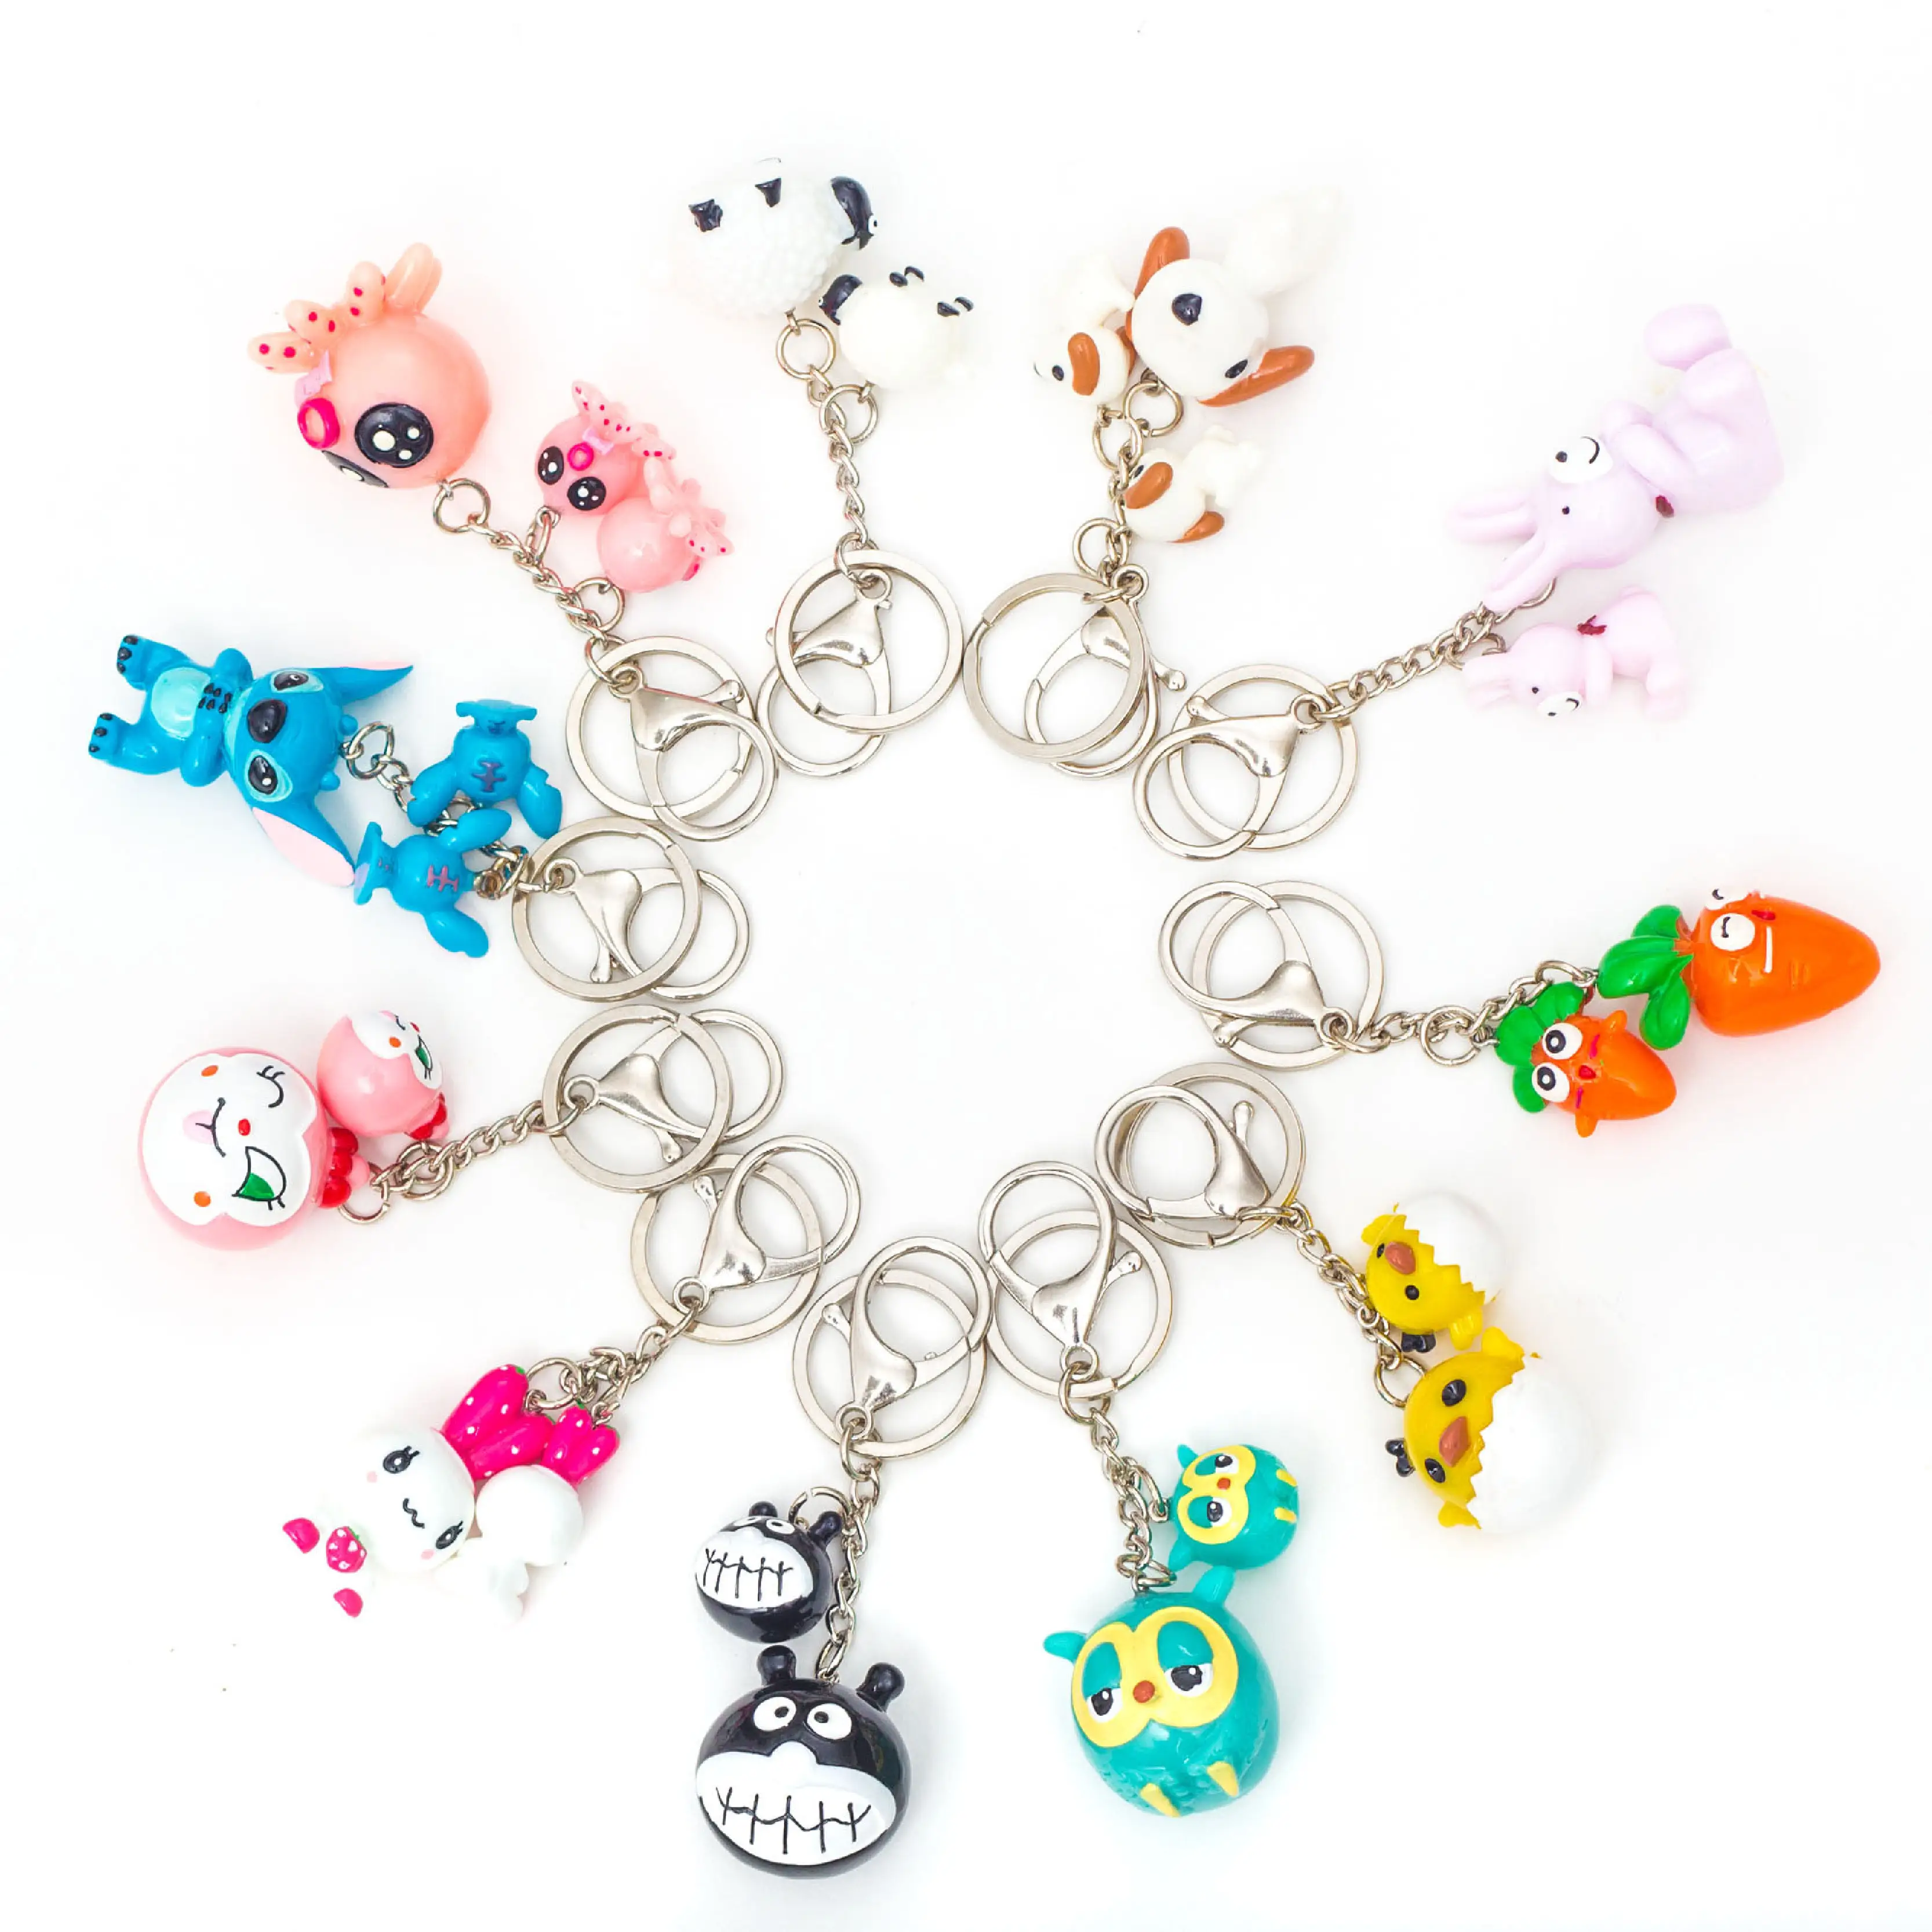 Custom 2D/3D PVC Keychains,Cute Multicolor Accessories Resin Acrylic Charms Keychain ,Make Rubber KeyChain With Your Logo